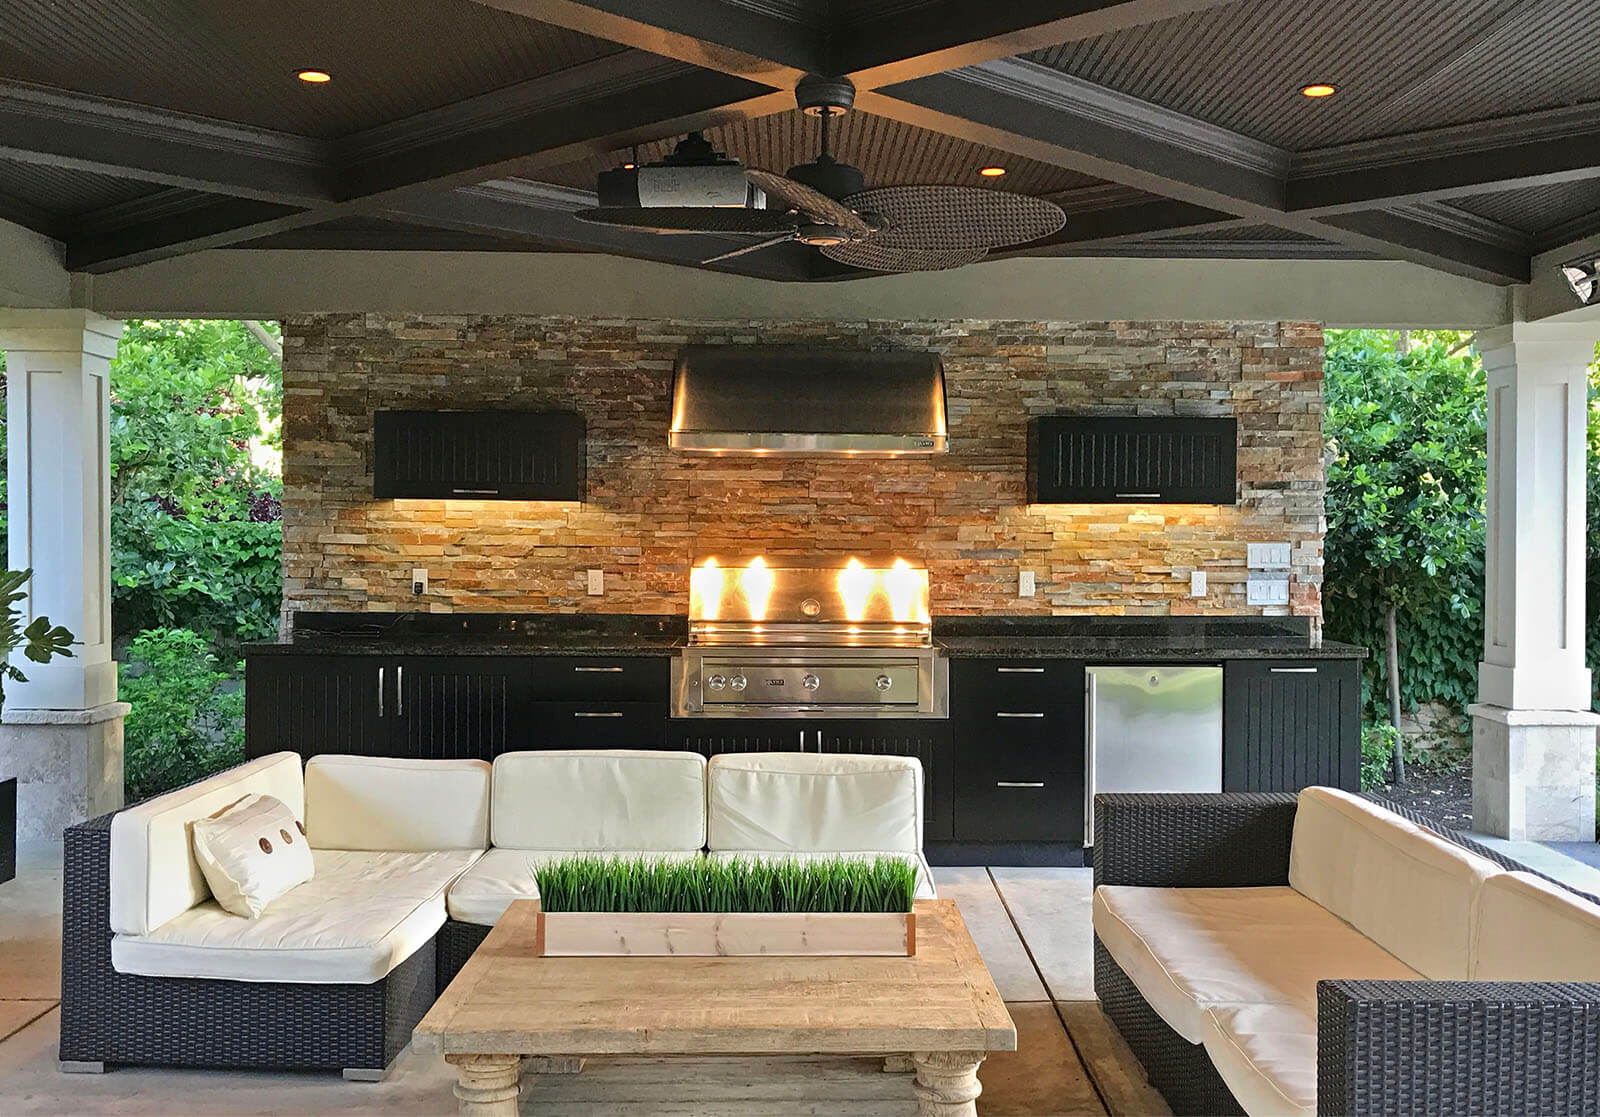 Covered outdoor kitchen and lounge with black granite counters, stone accent wall, stove and hood with contemporary styling